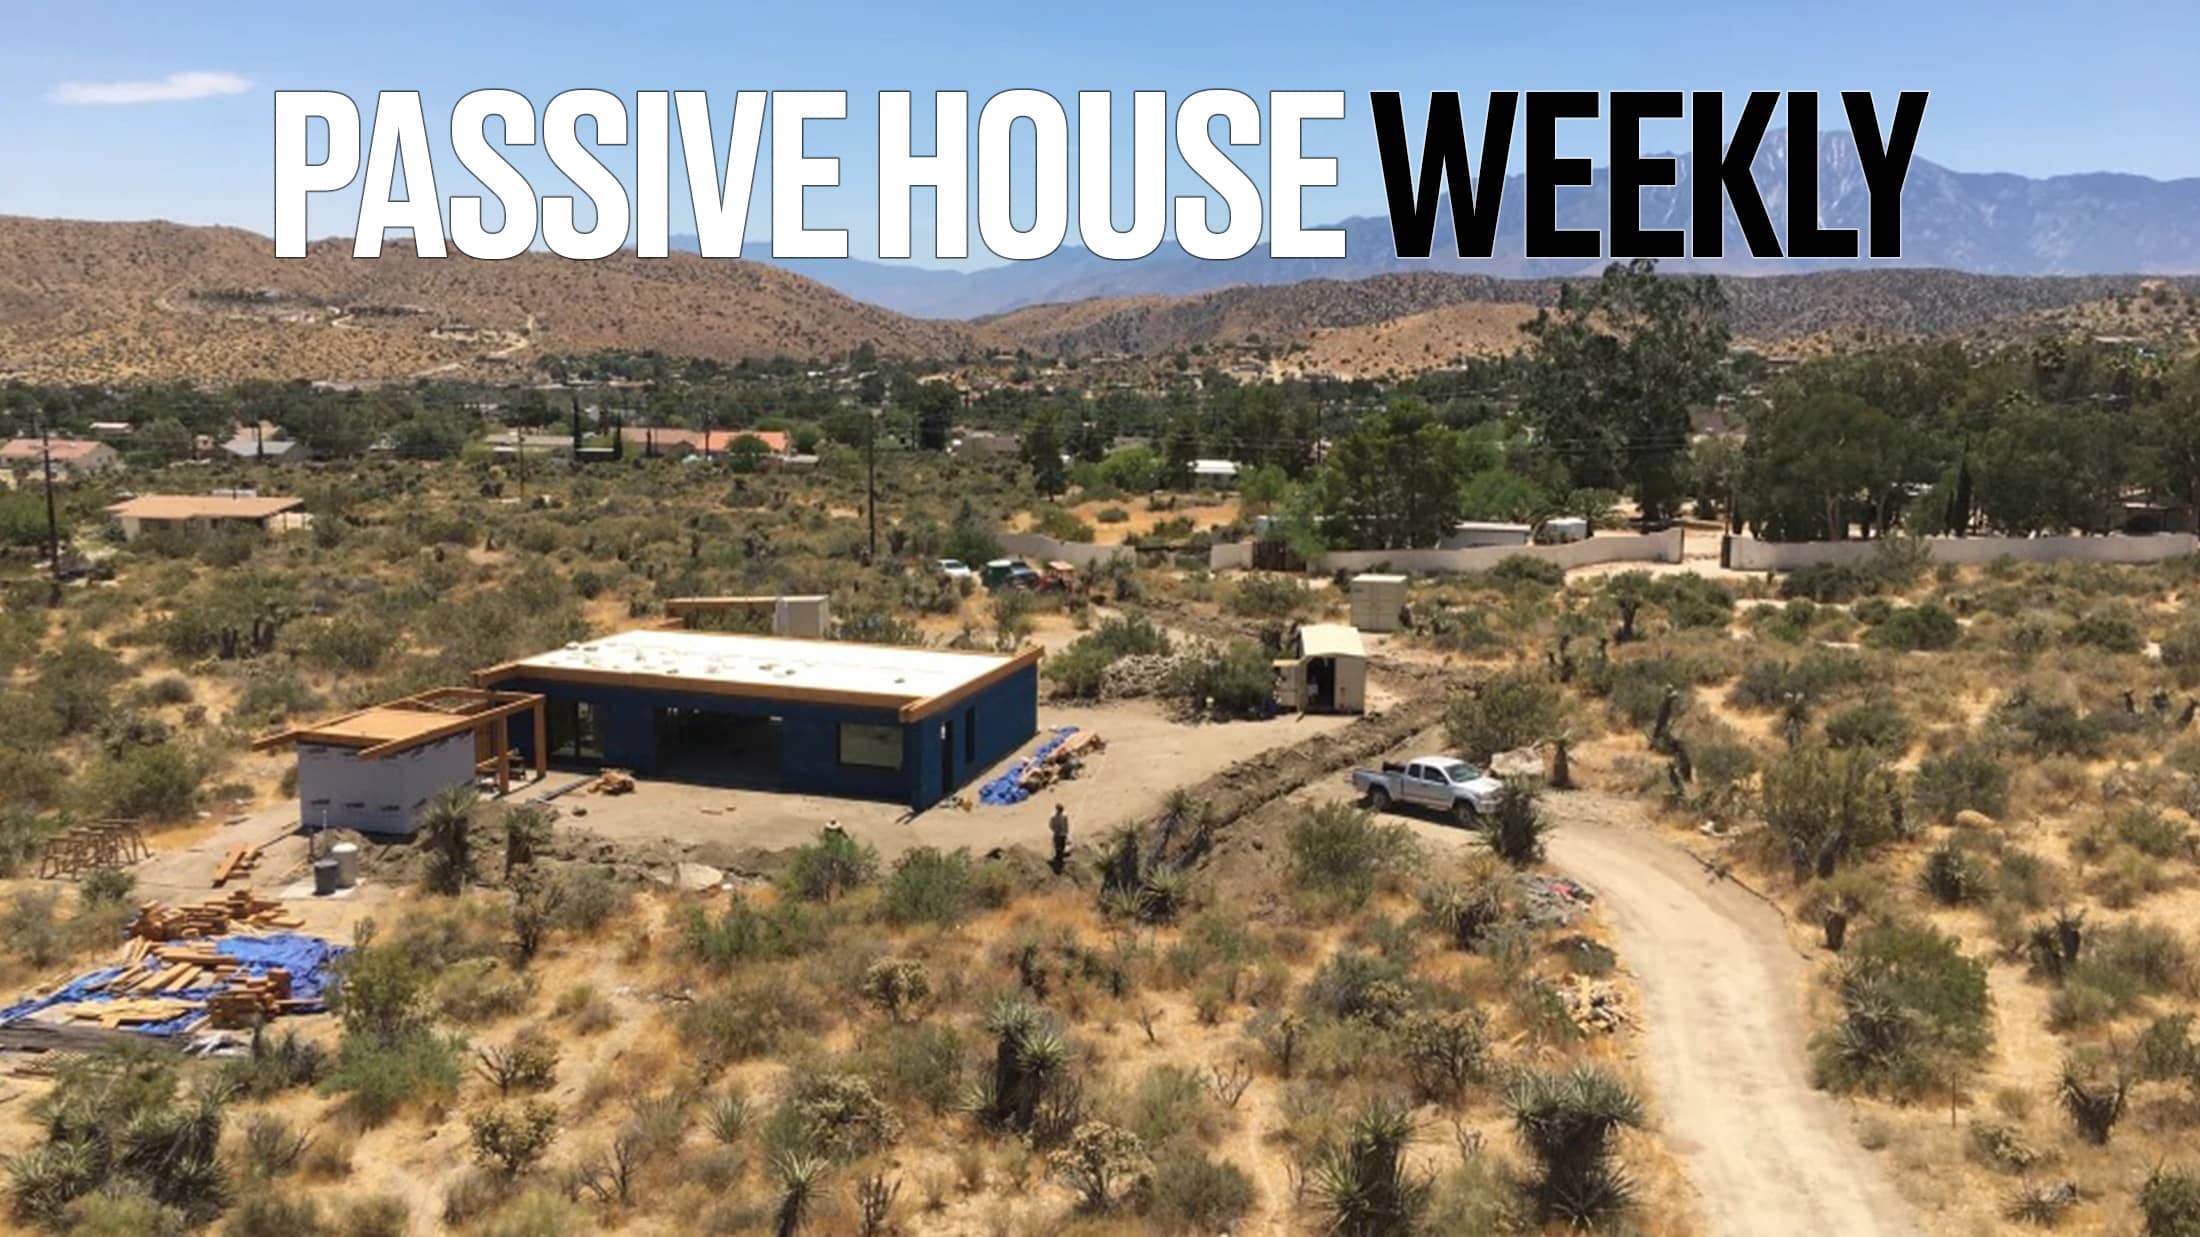 The featured project above is a single-family home in California’s Morongo Valley, just outside of Palm Springs.